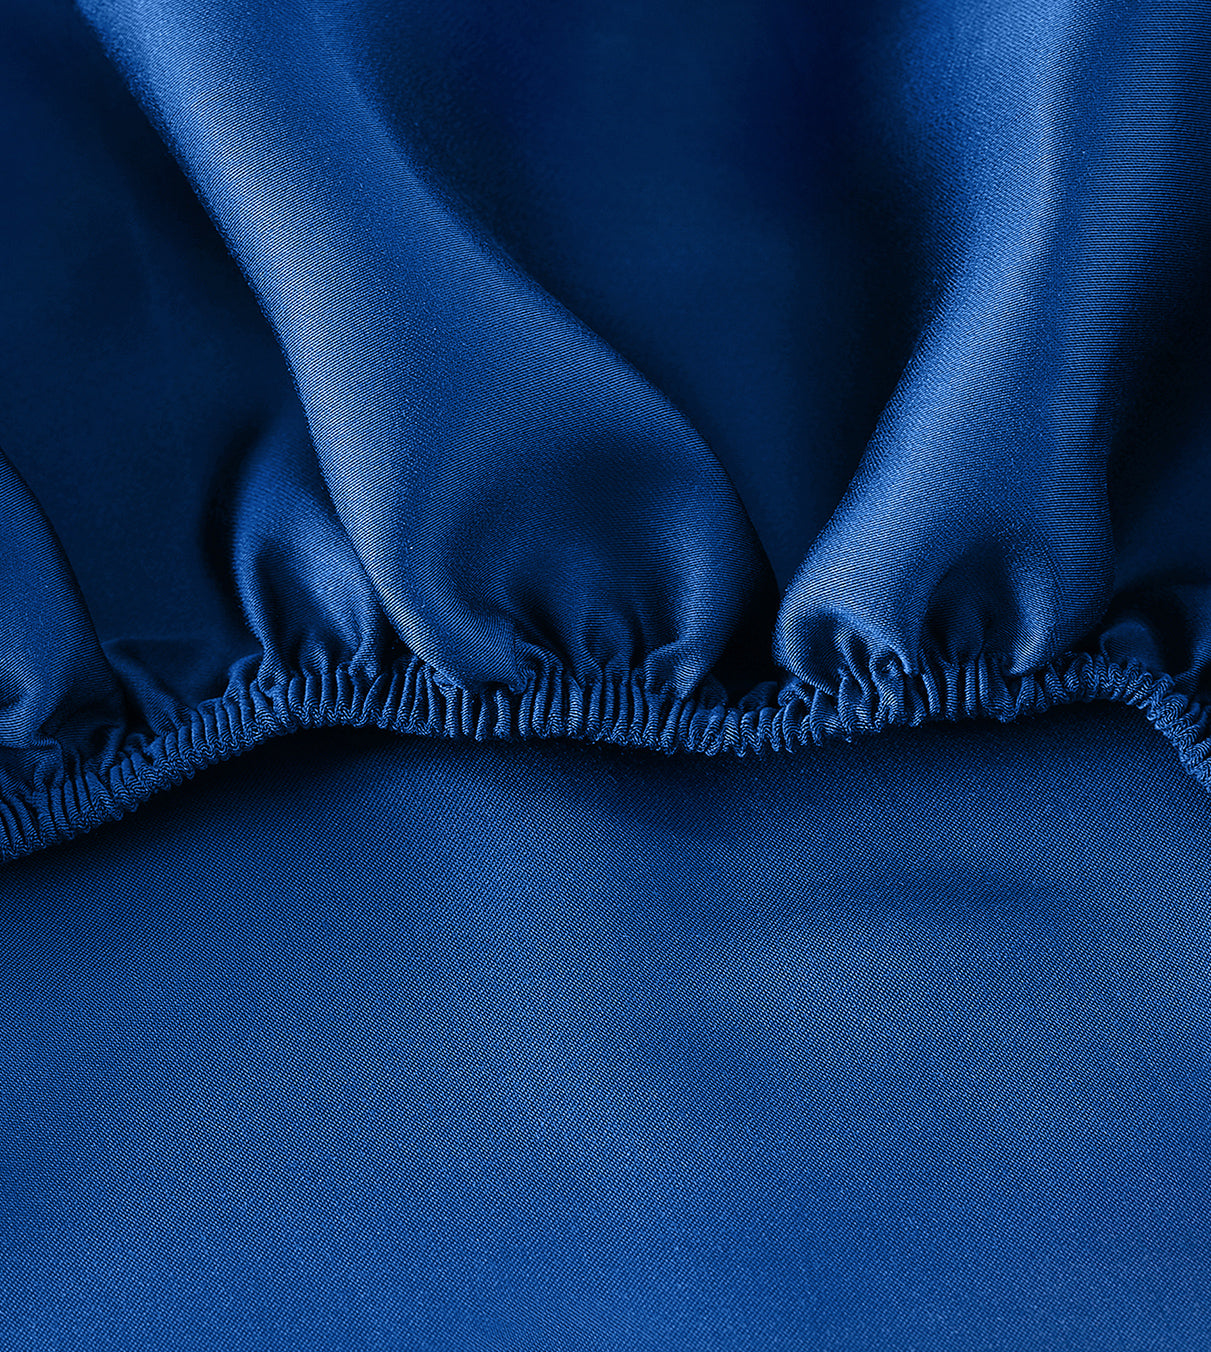 Product: Cooling Bamboo Twill Sheet Set | Color: Dark Blue